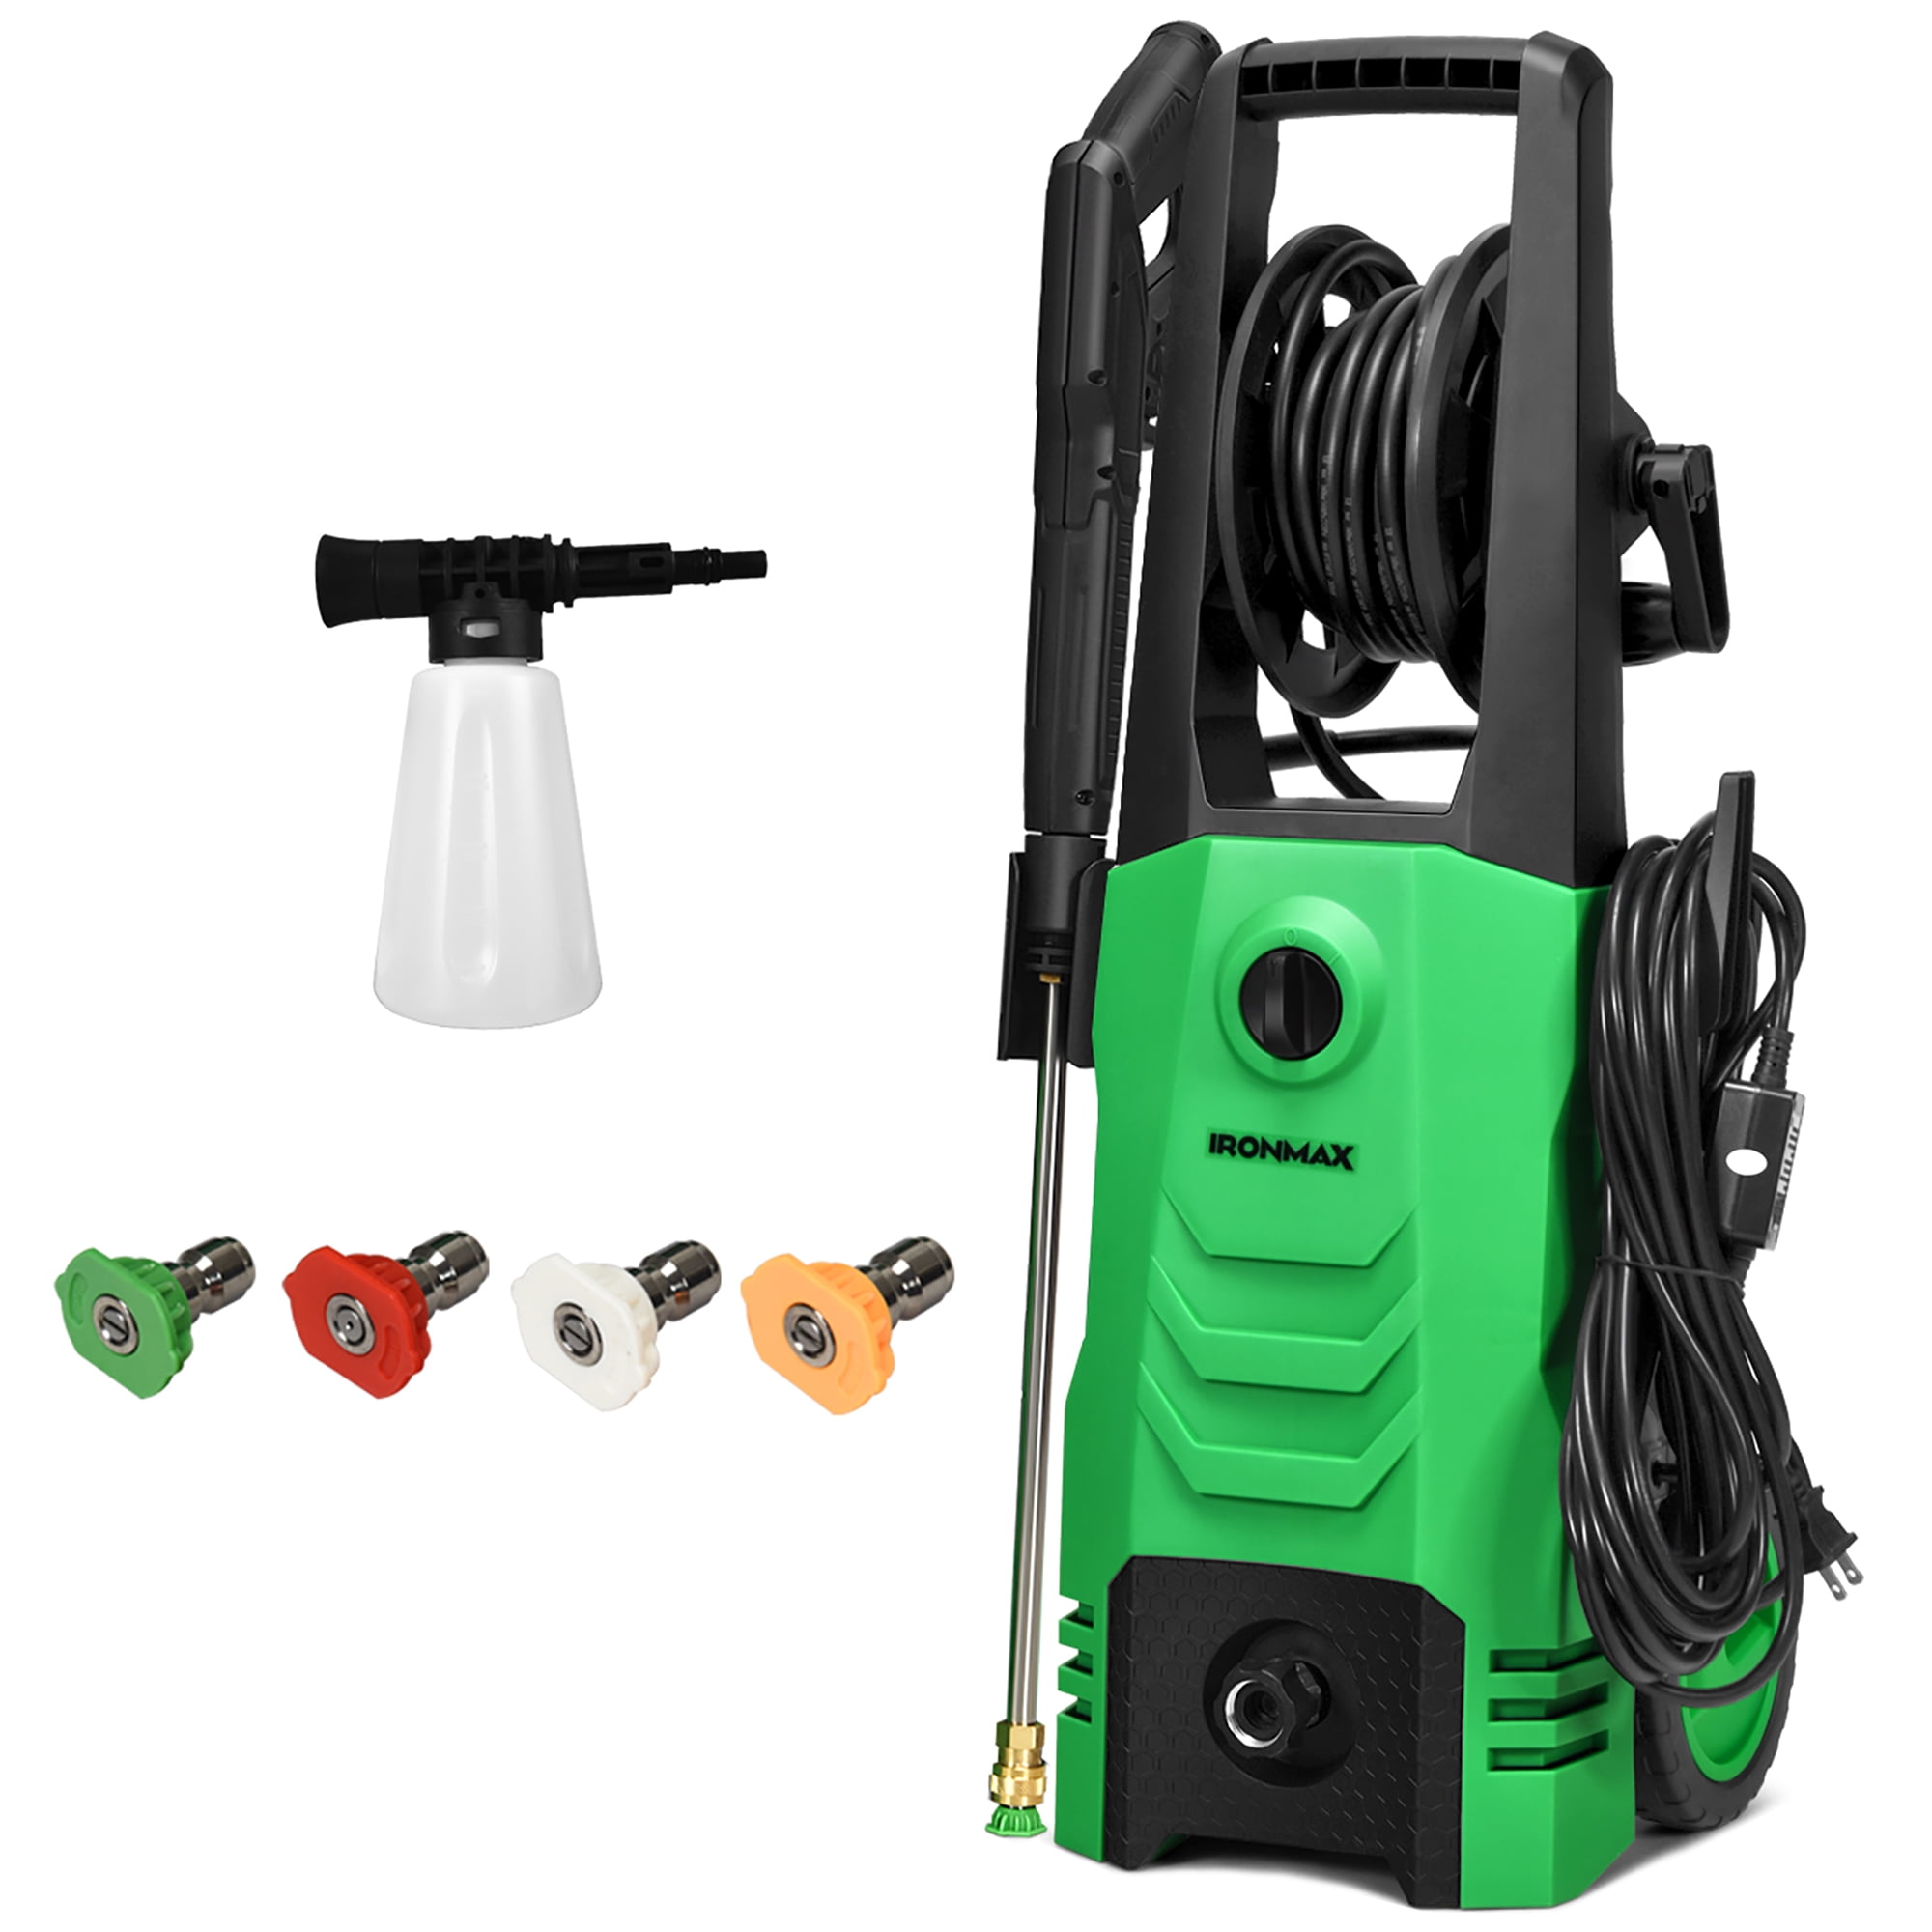  PAXCESS Powerful Electric Pressure Washer, Portable Power  Washer with Spray Gun, Adjustable Nozzle, Foam Cannon, Pressure Hose, Car  Washer Machine for Car/Patio/Deck Cleaning : Patio, Lawn & Garden